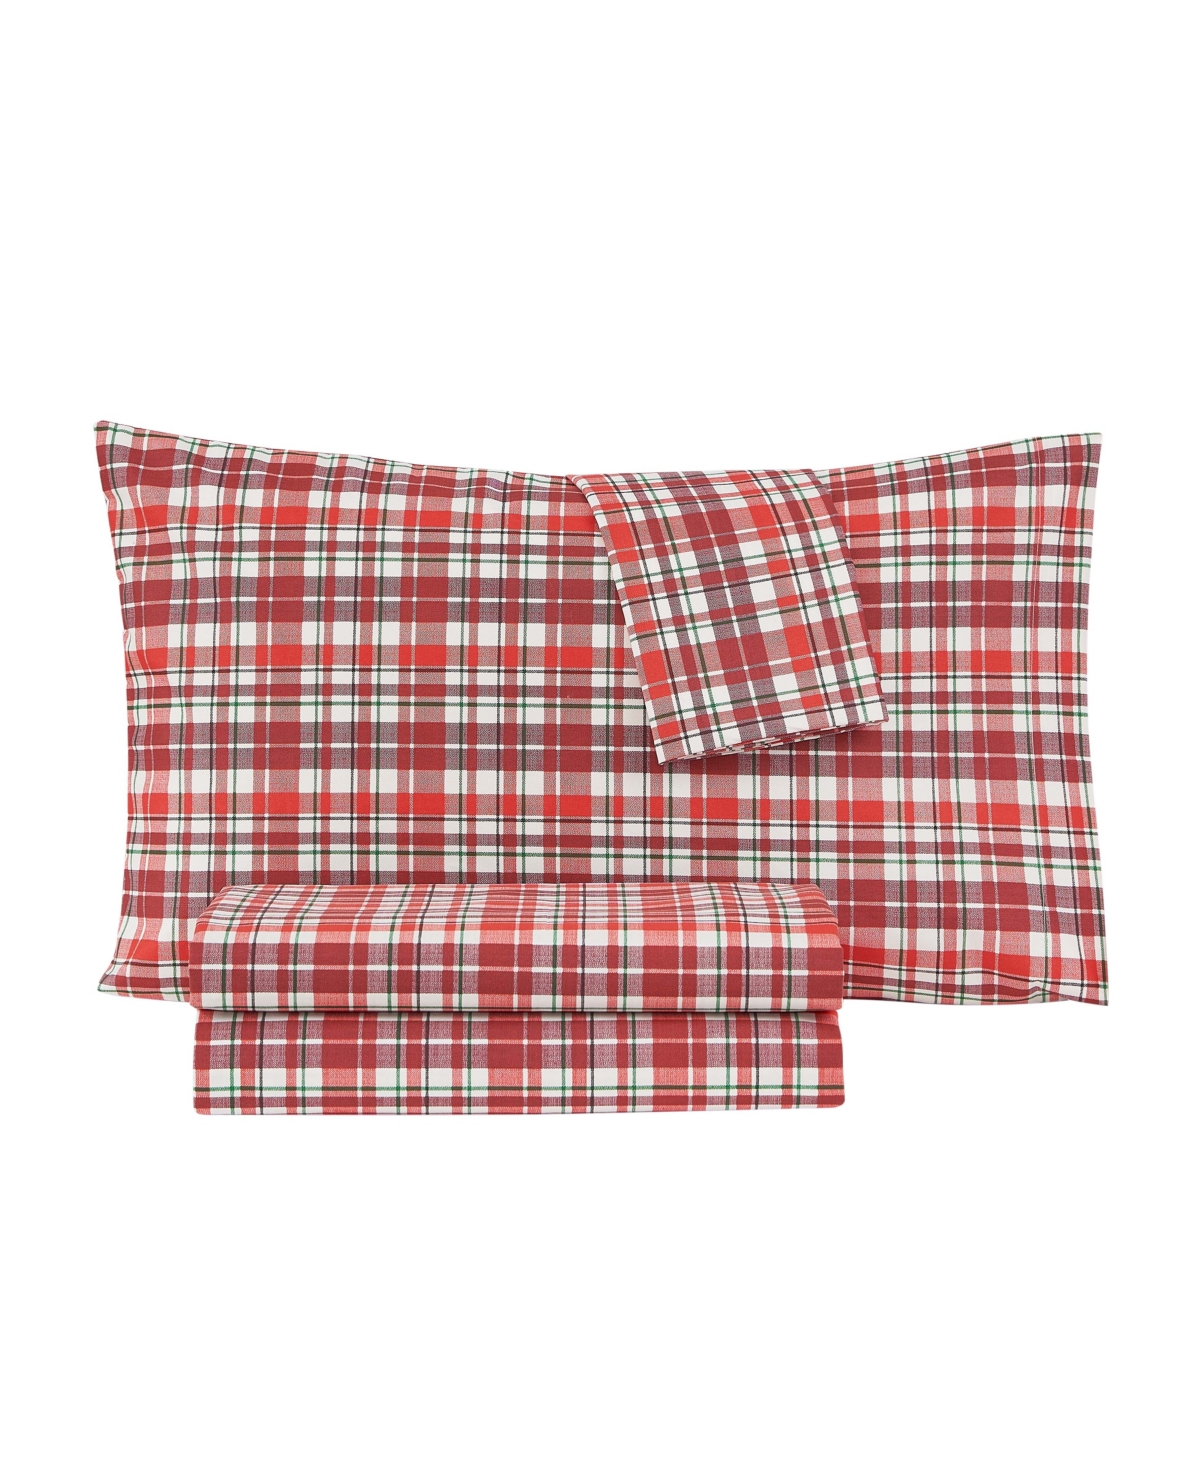 Jessica Sanders Holiday Microfiber 4 Pc Full Sheet Set Bedding In Red Plaid